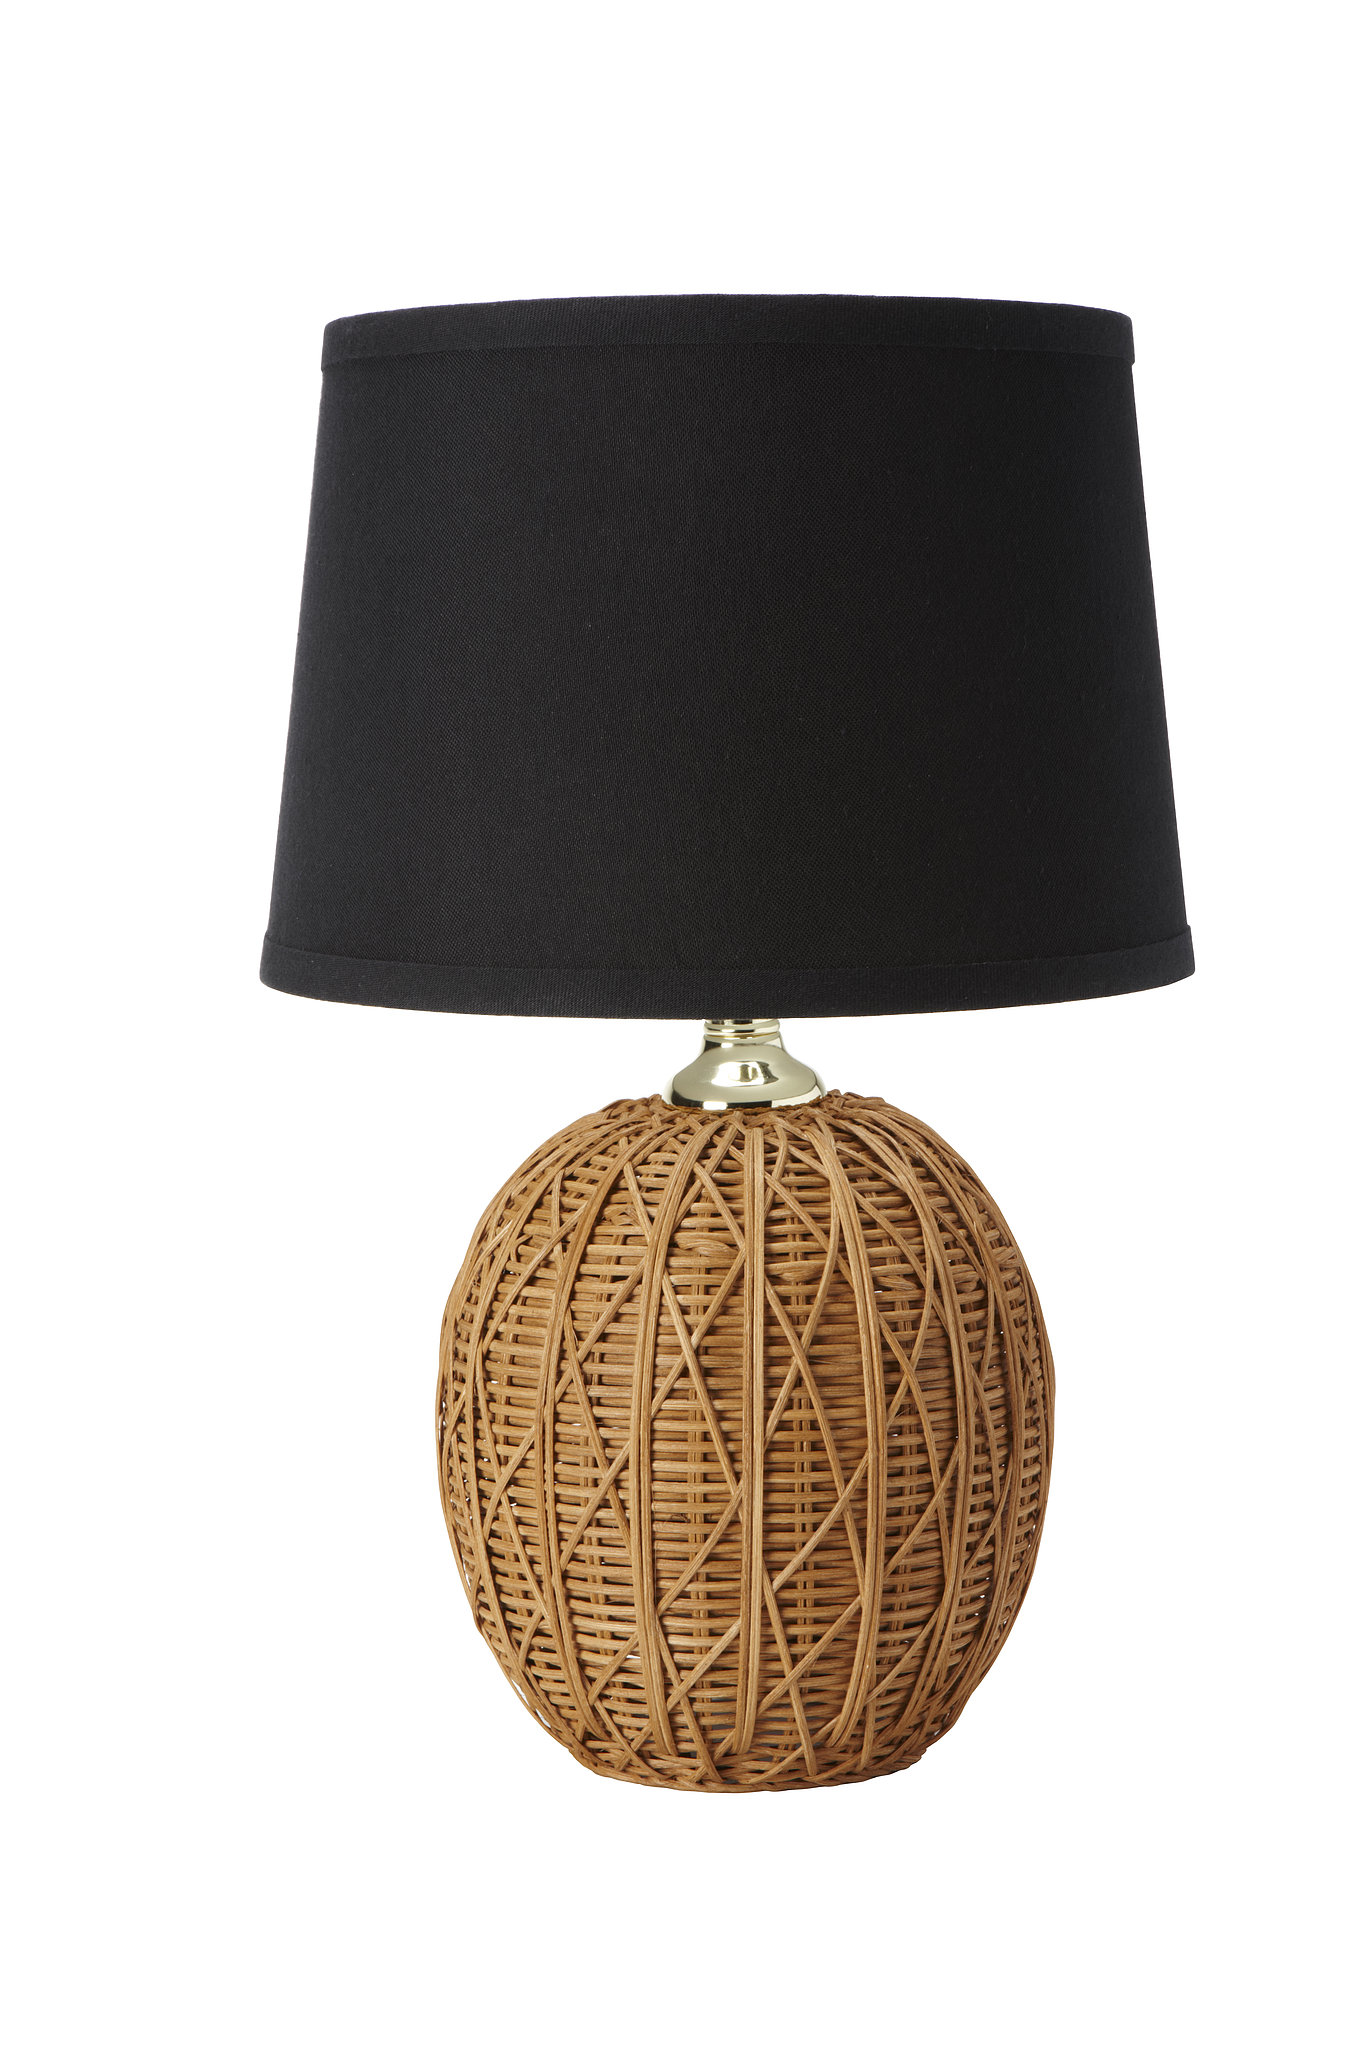 Rattan Table Lamp | Exclusive! First Look at the New Nate Berkus